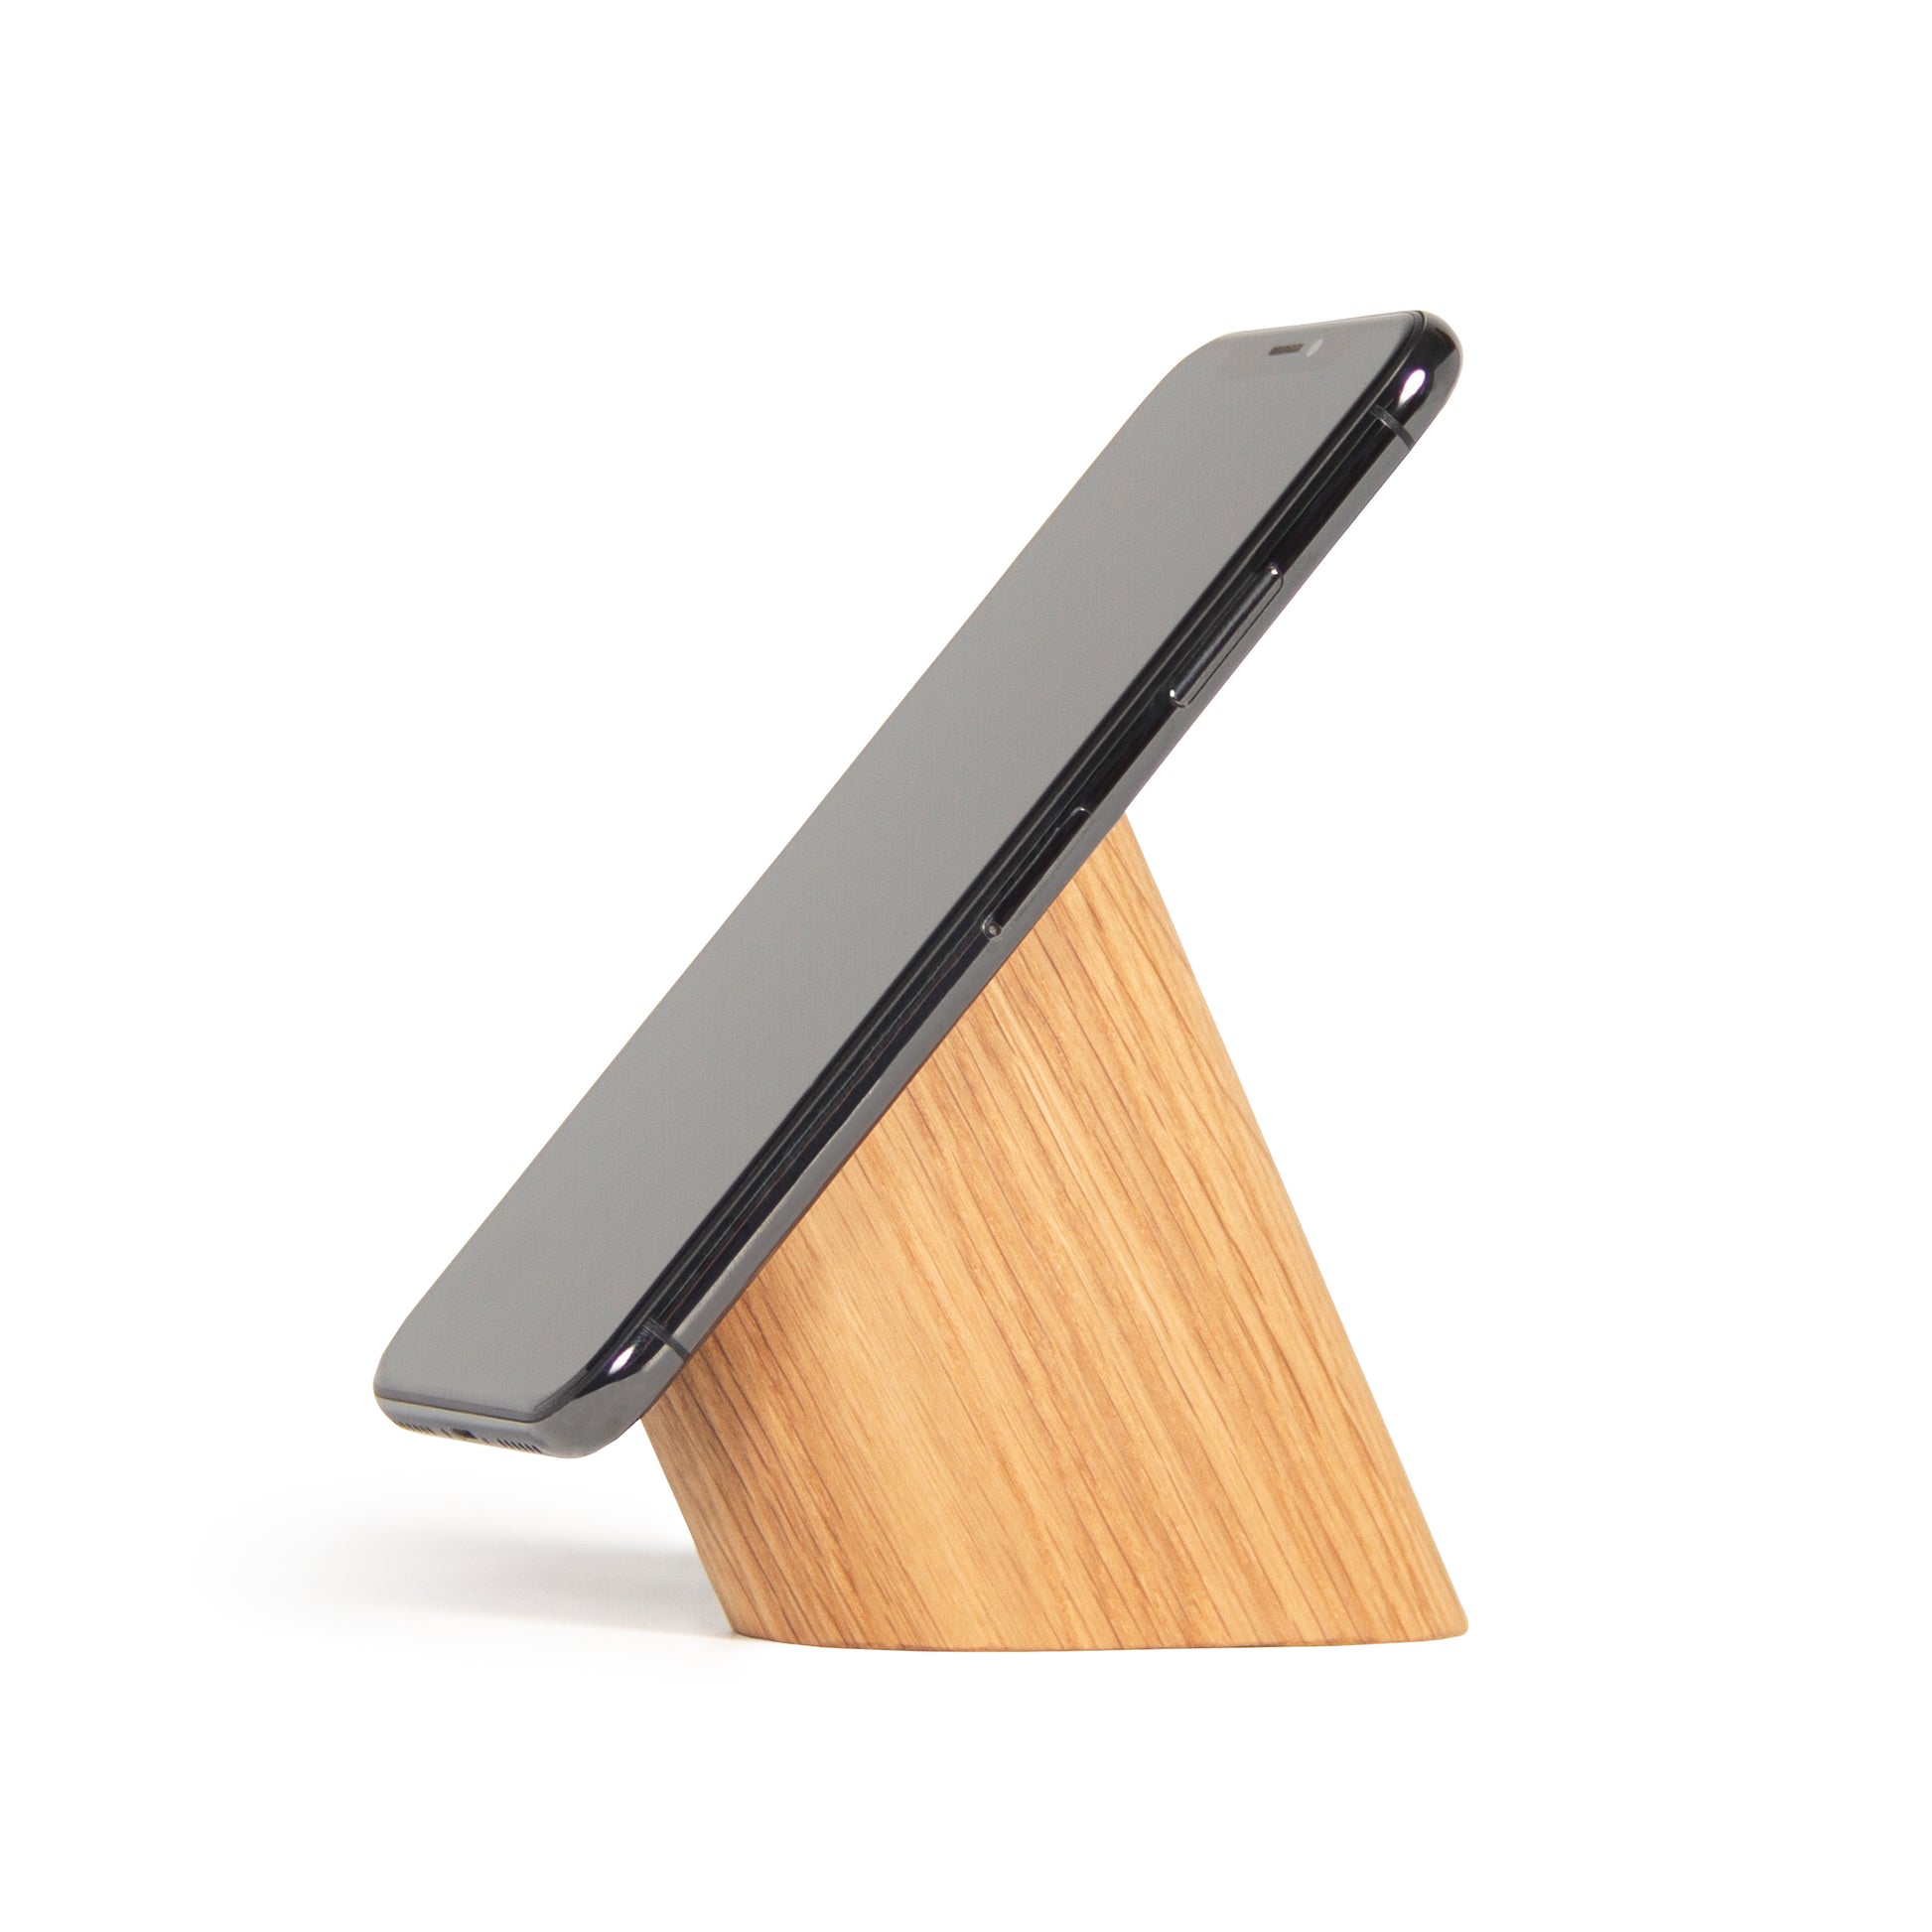 wooden smartphone stand with iPhone on it on white background